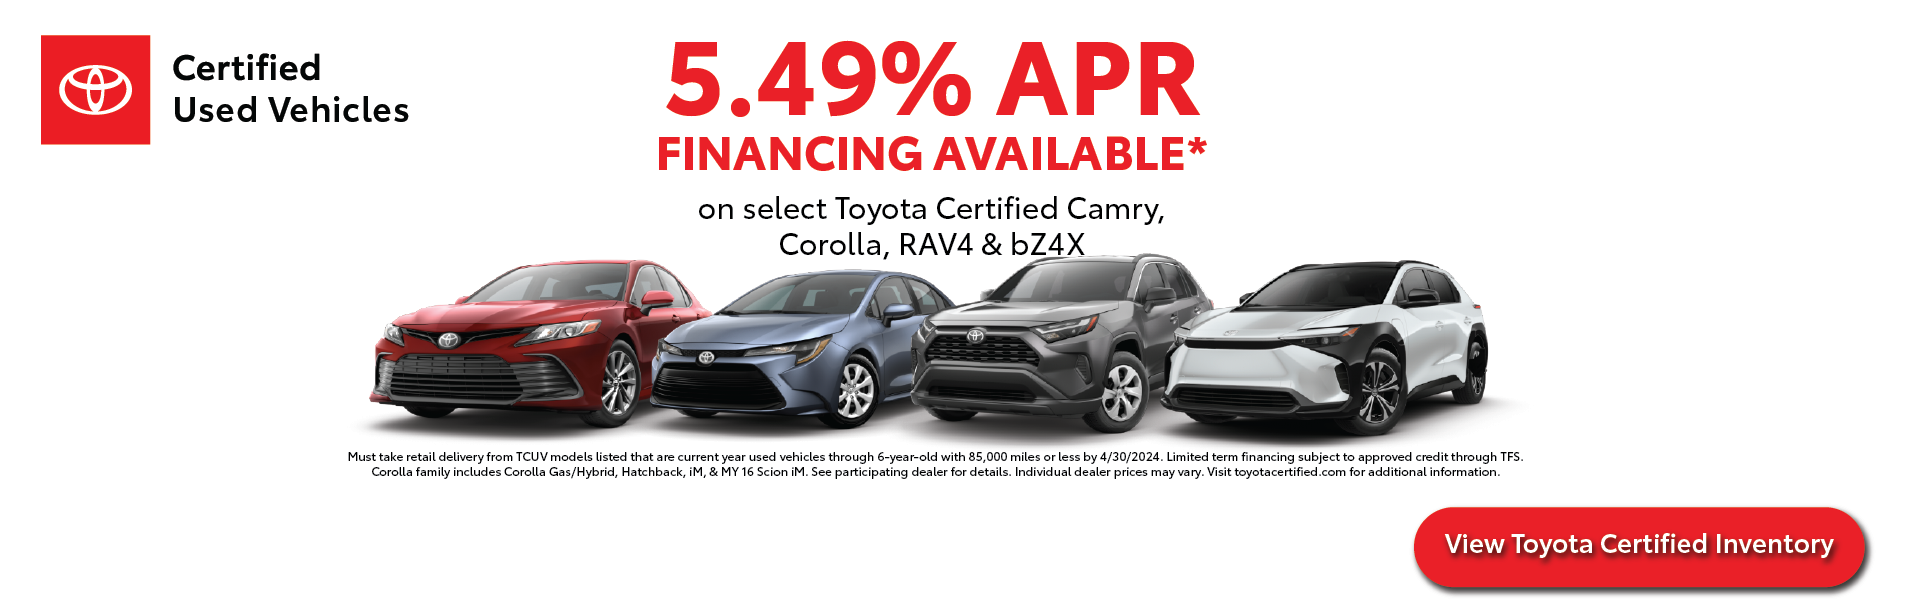 Toyota Certified Used Vehicle Offer | Dan Hecht Toyota in Effingham IL